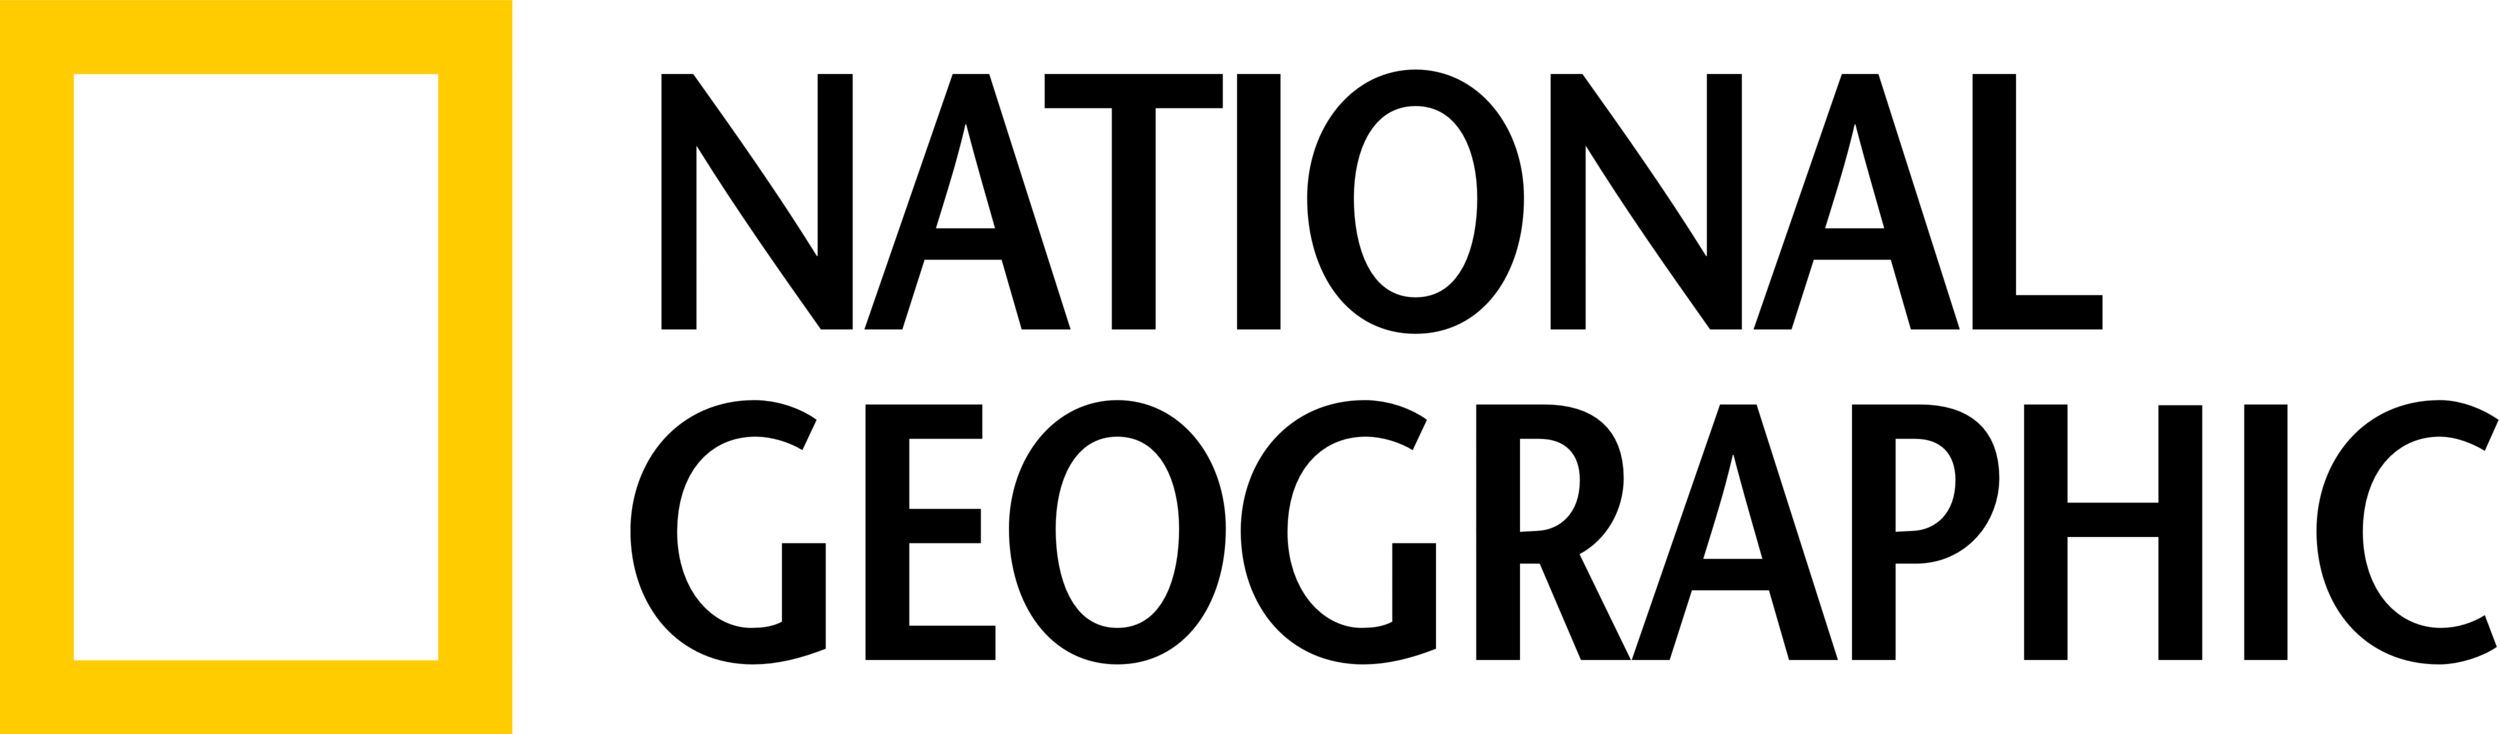 National_Geographic_logo-transparent.png